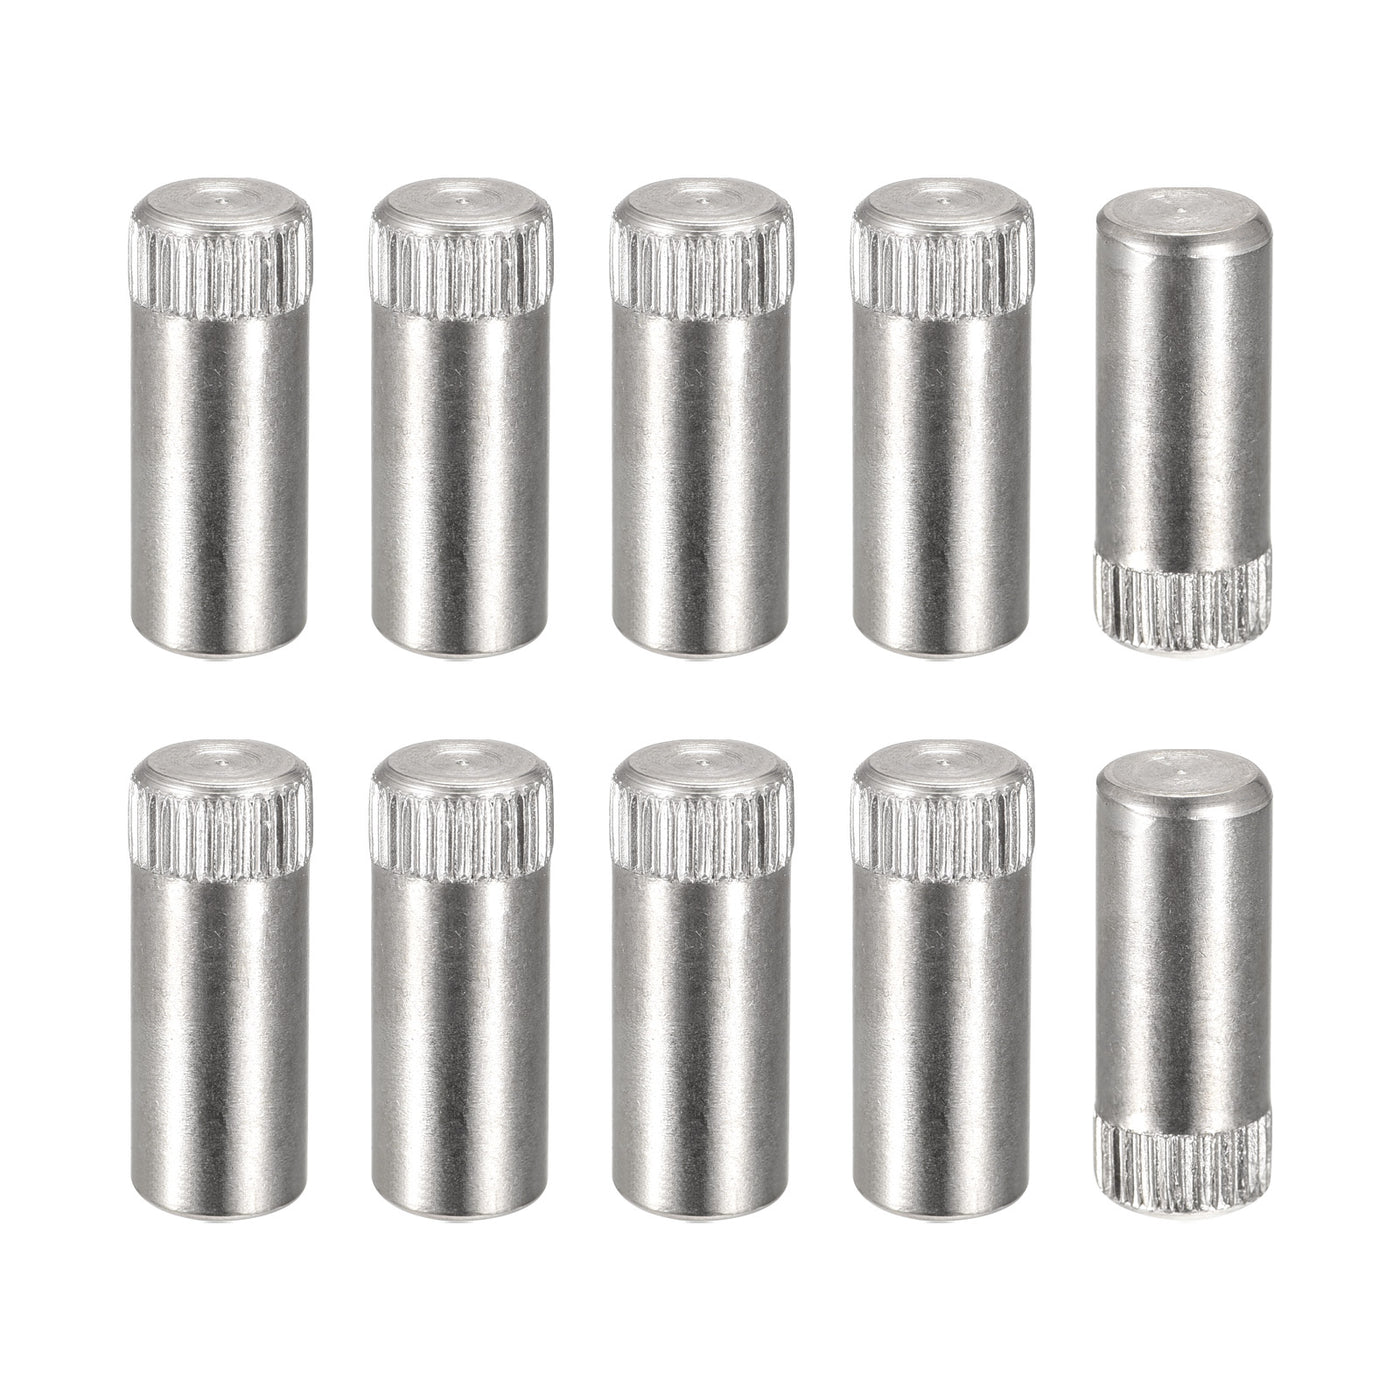 uxcell Uxcell 8x20mm 304 Stainless Steel Dowel Pins, 10Pcs Knurled Head Flat End Dowel Pin